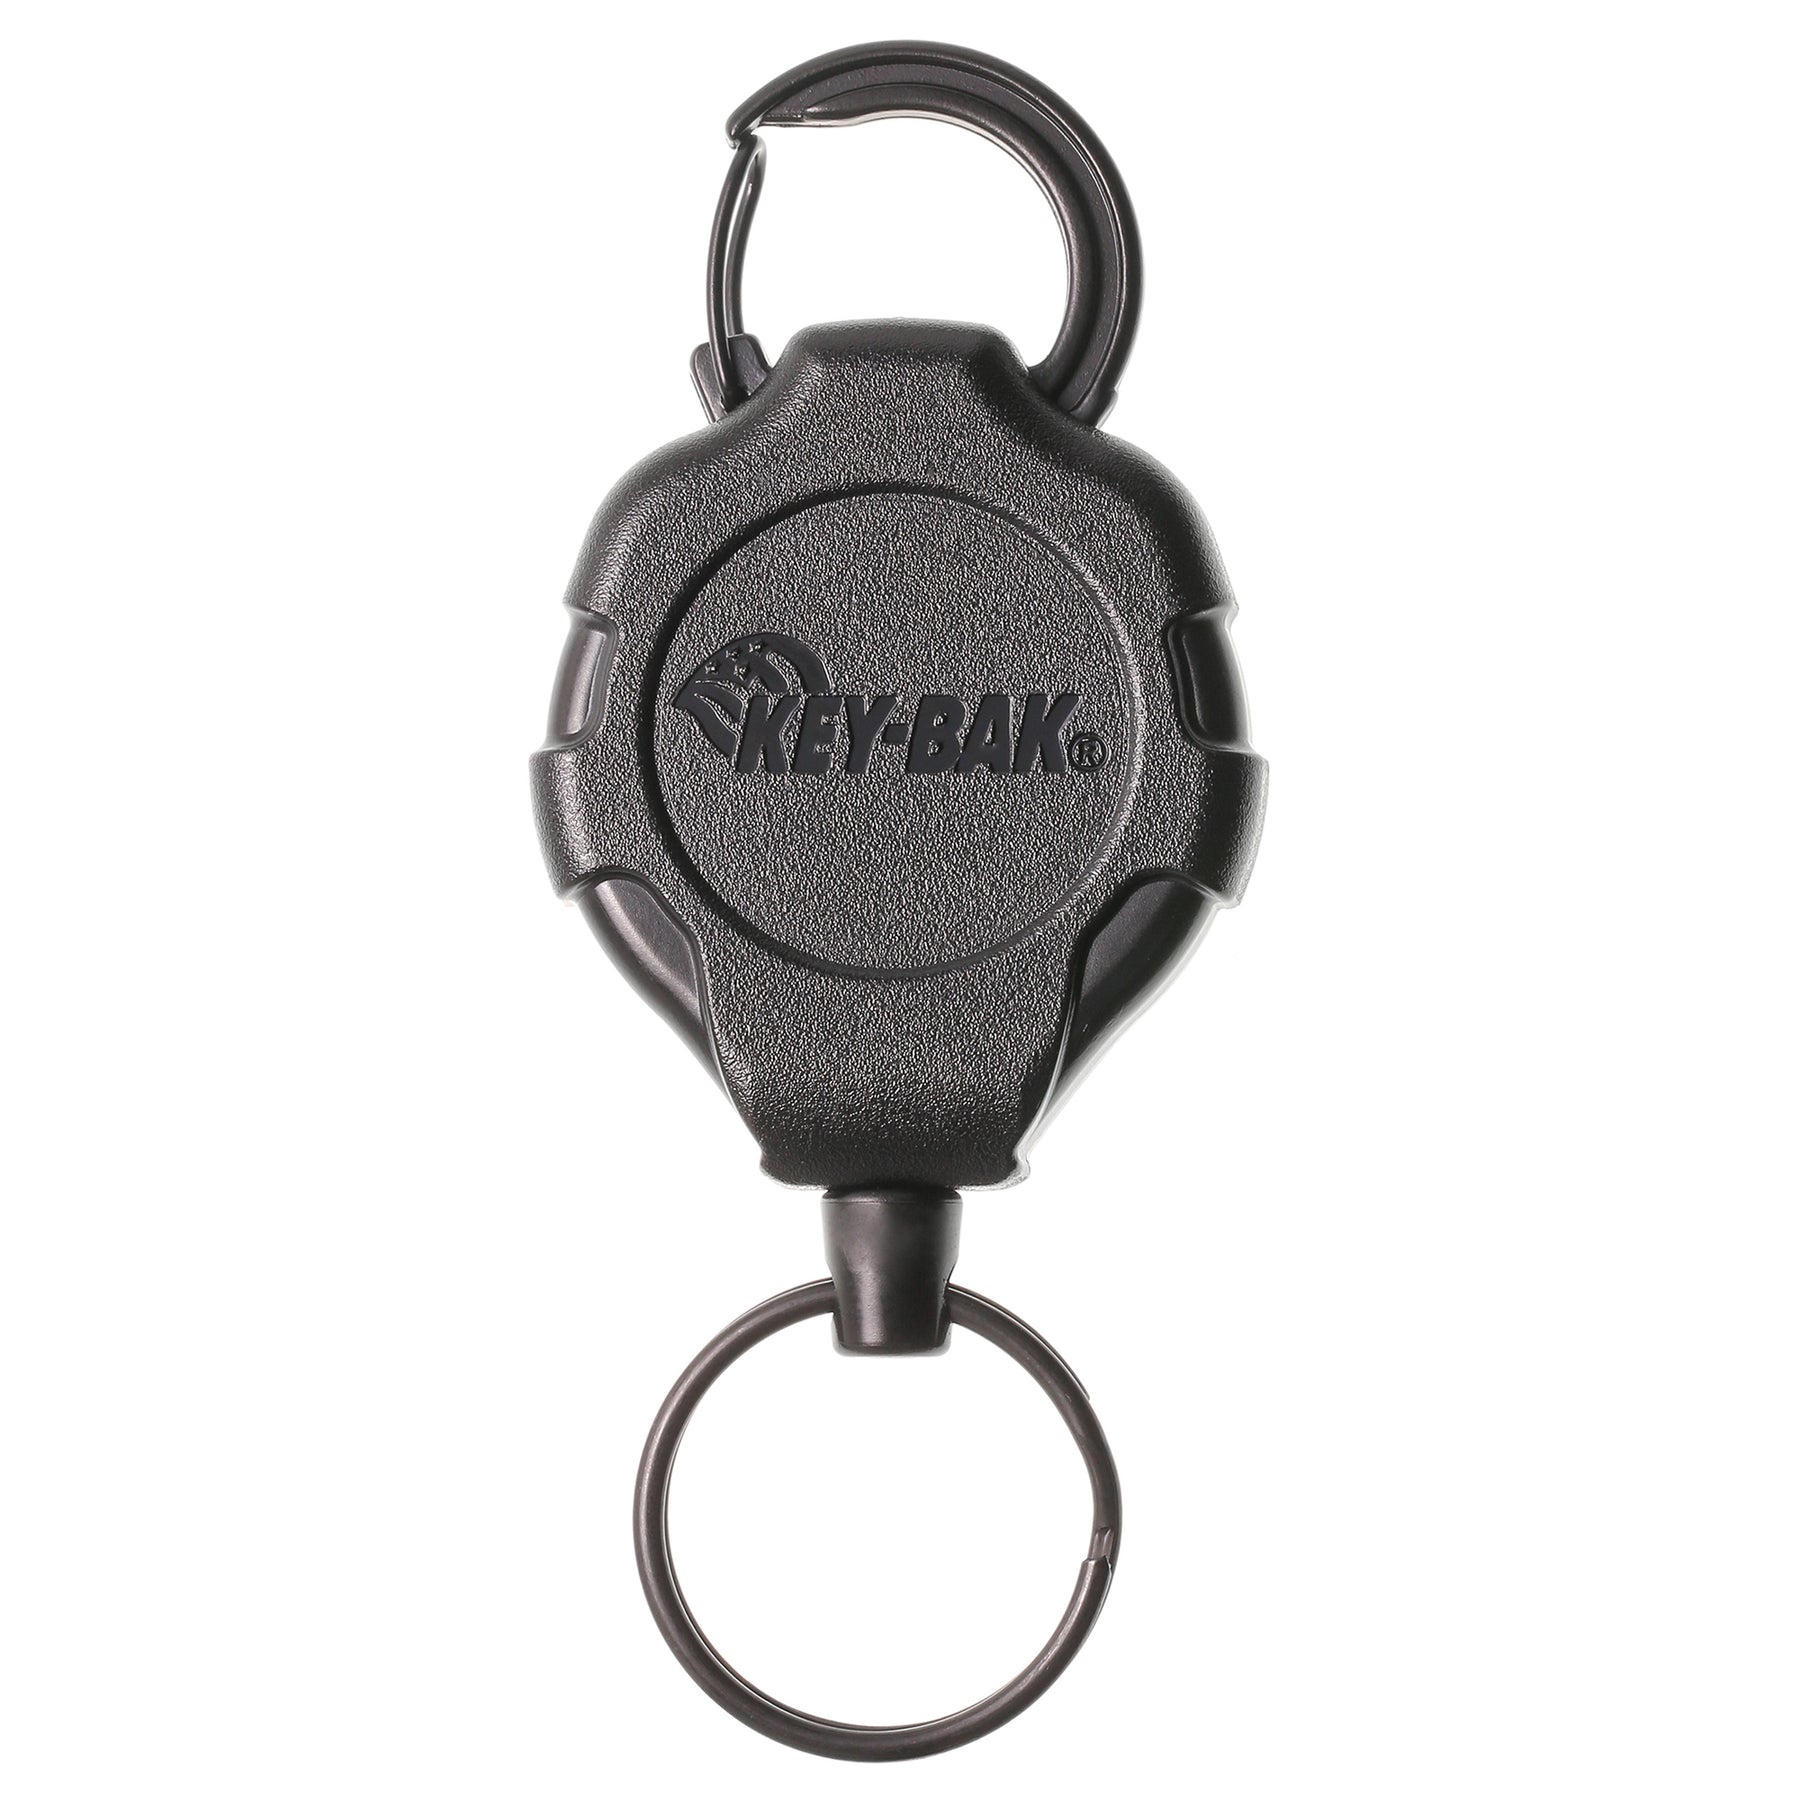 Carabiner Clip Keychain with Lock - Bulk Pack